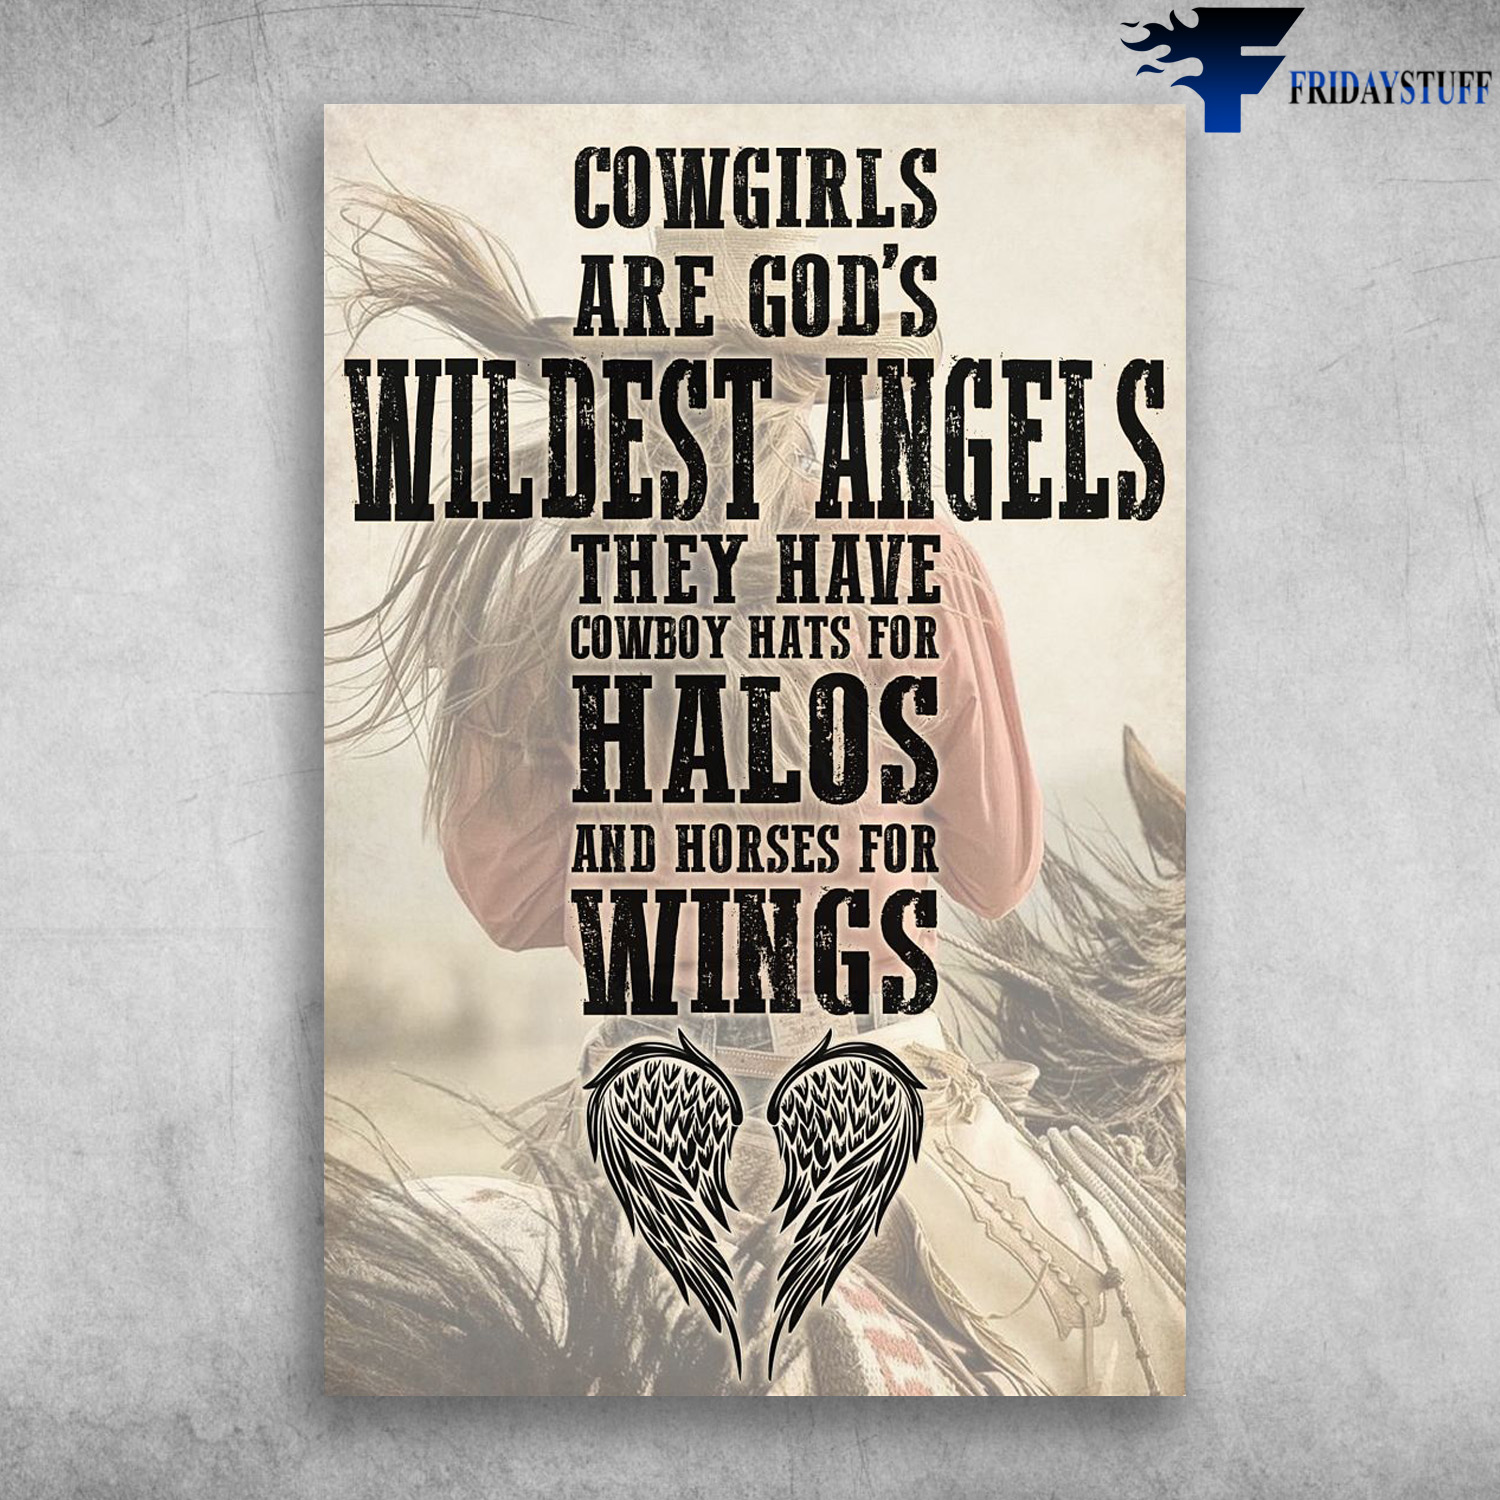 Cowgirl Ricing Horse - Cowgirls Are God's Wildest Angels, They Have Cowboy Hats For Halos And Horses For Wings